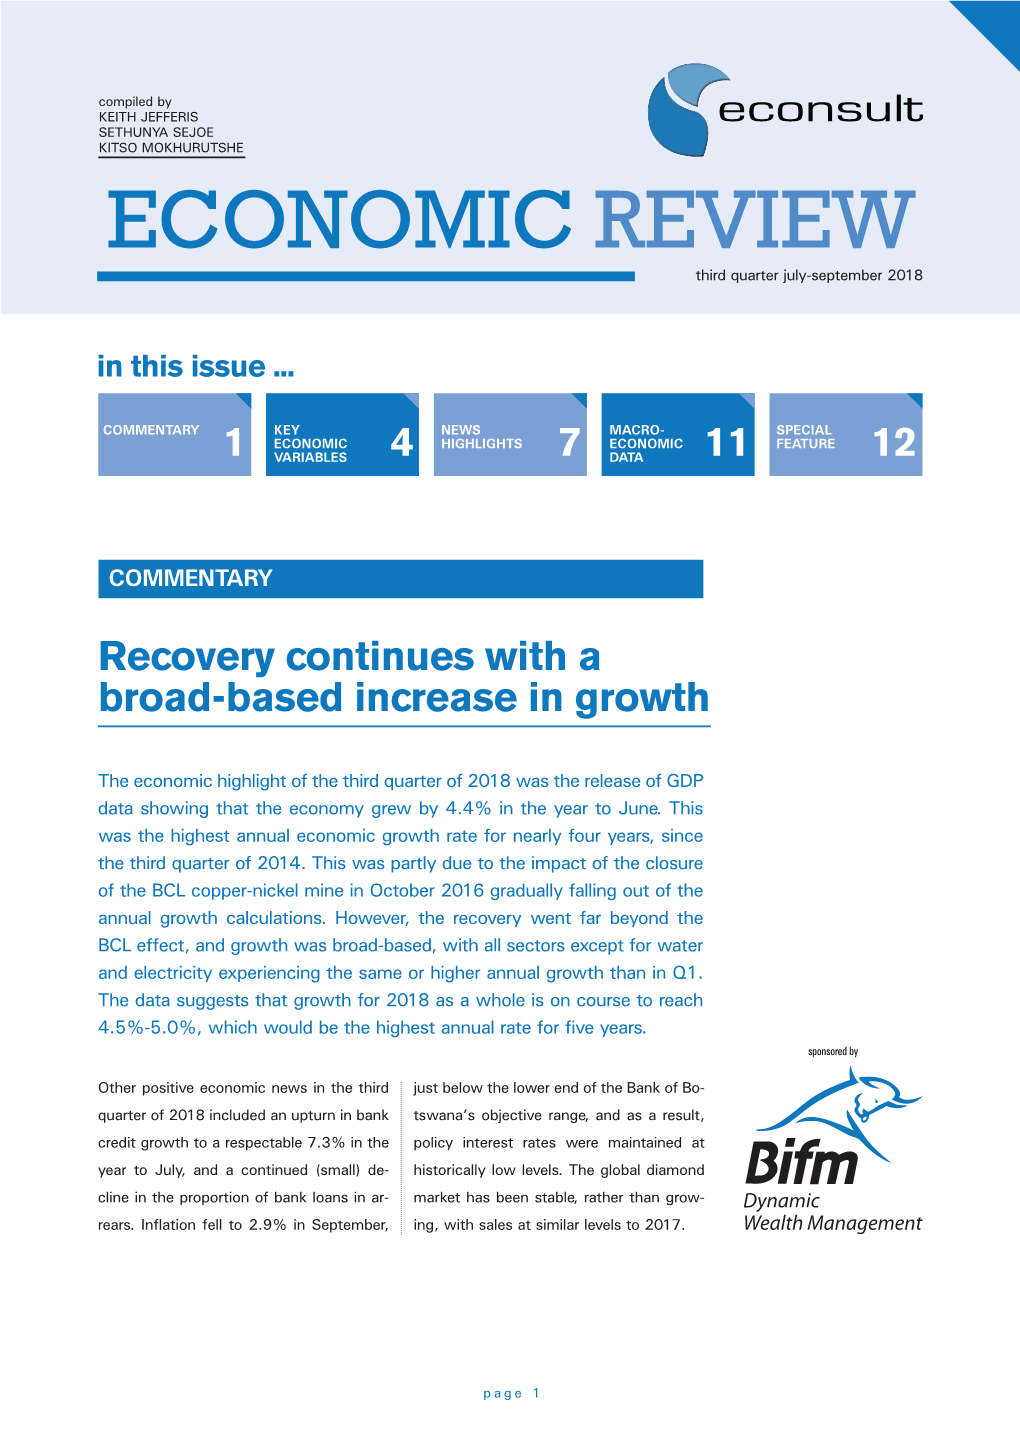 ECONOMIC REVIEW Third Quarter July-September 2018 in This Issue